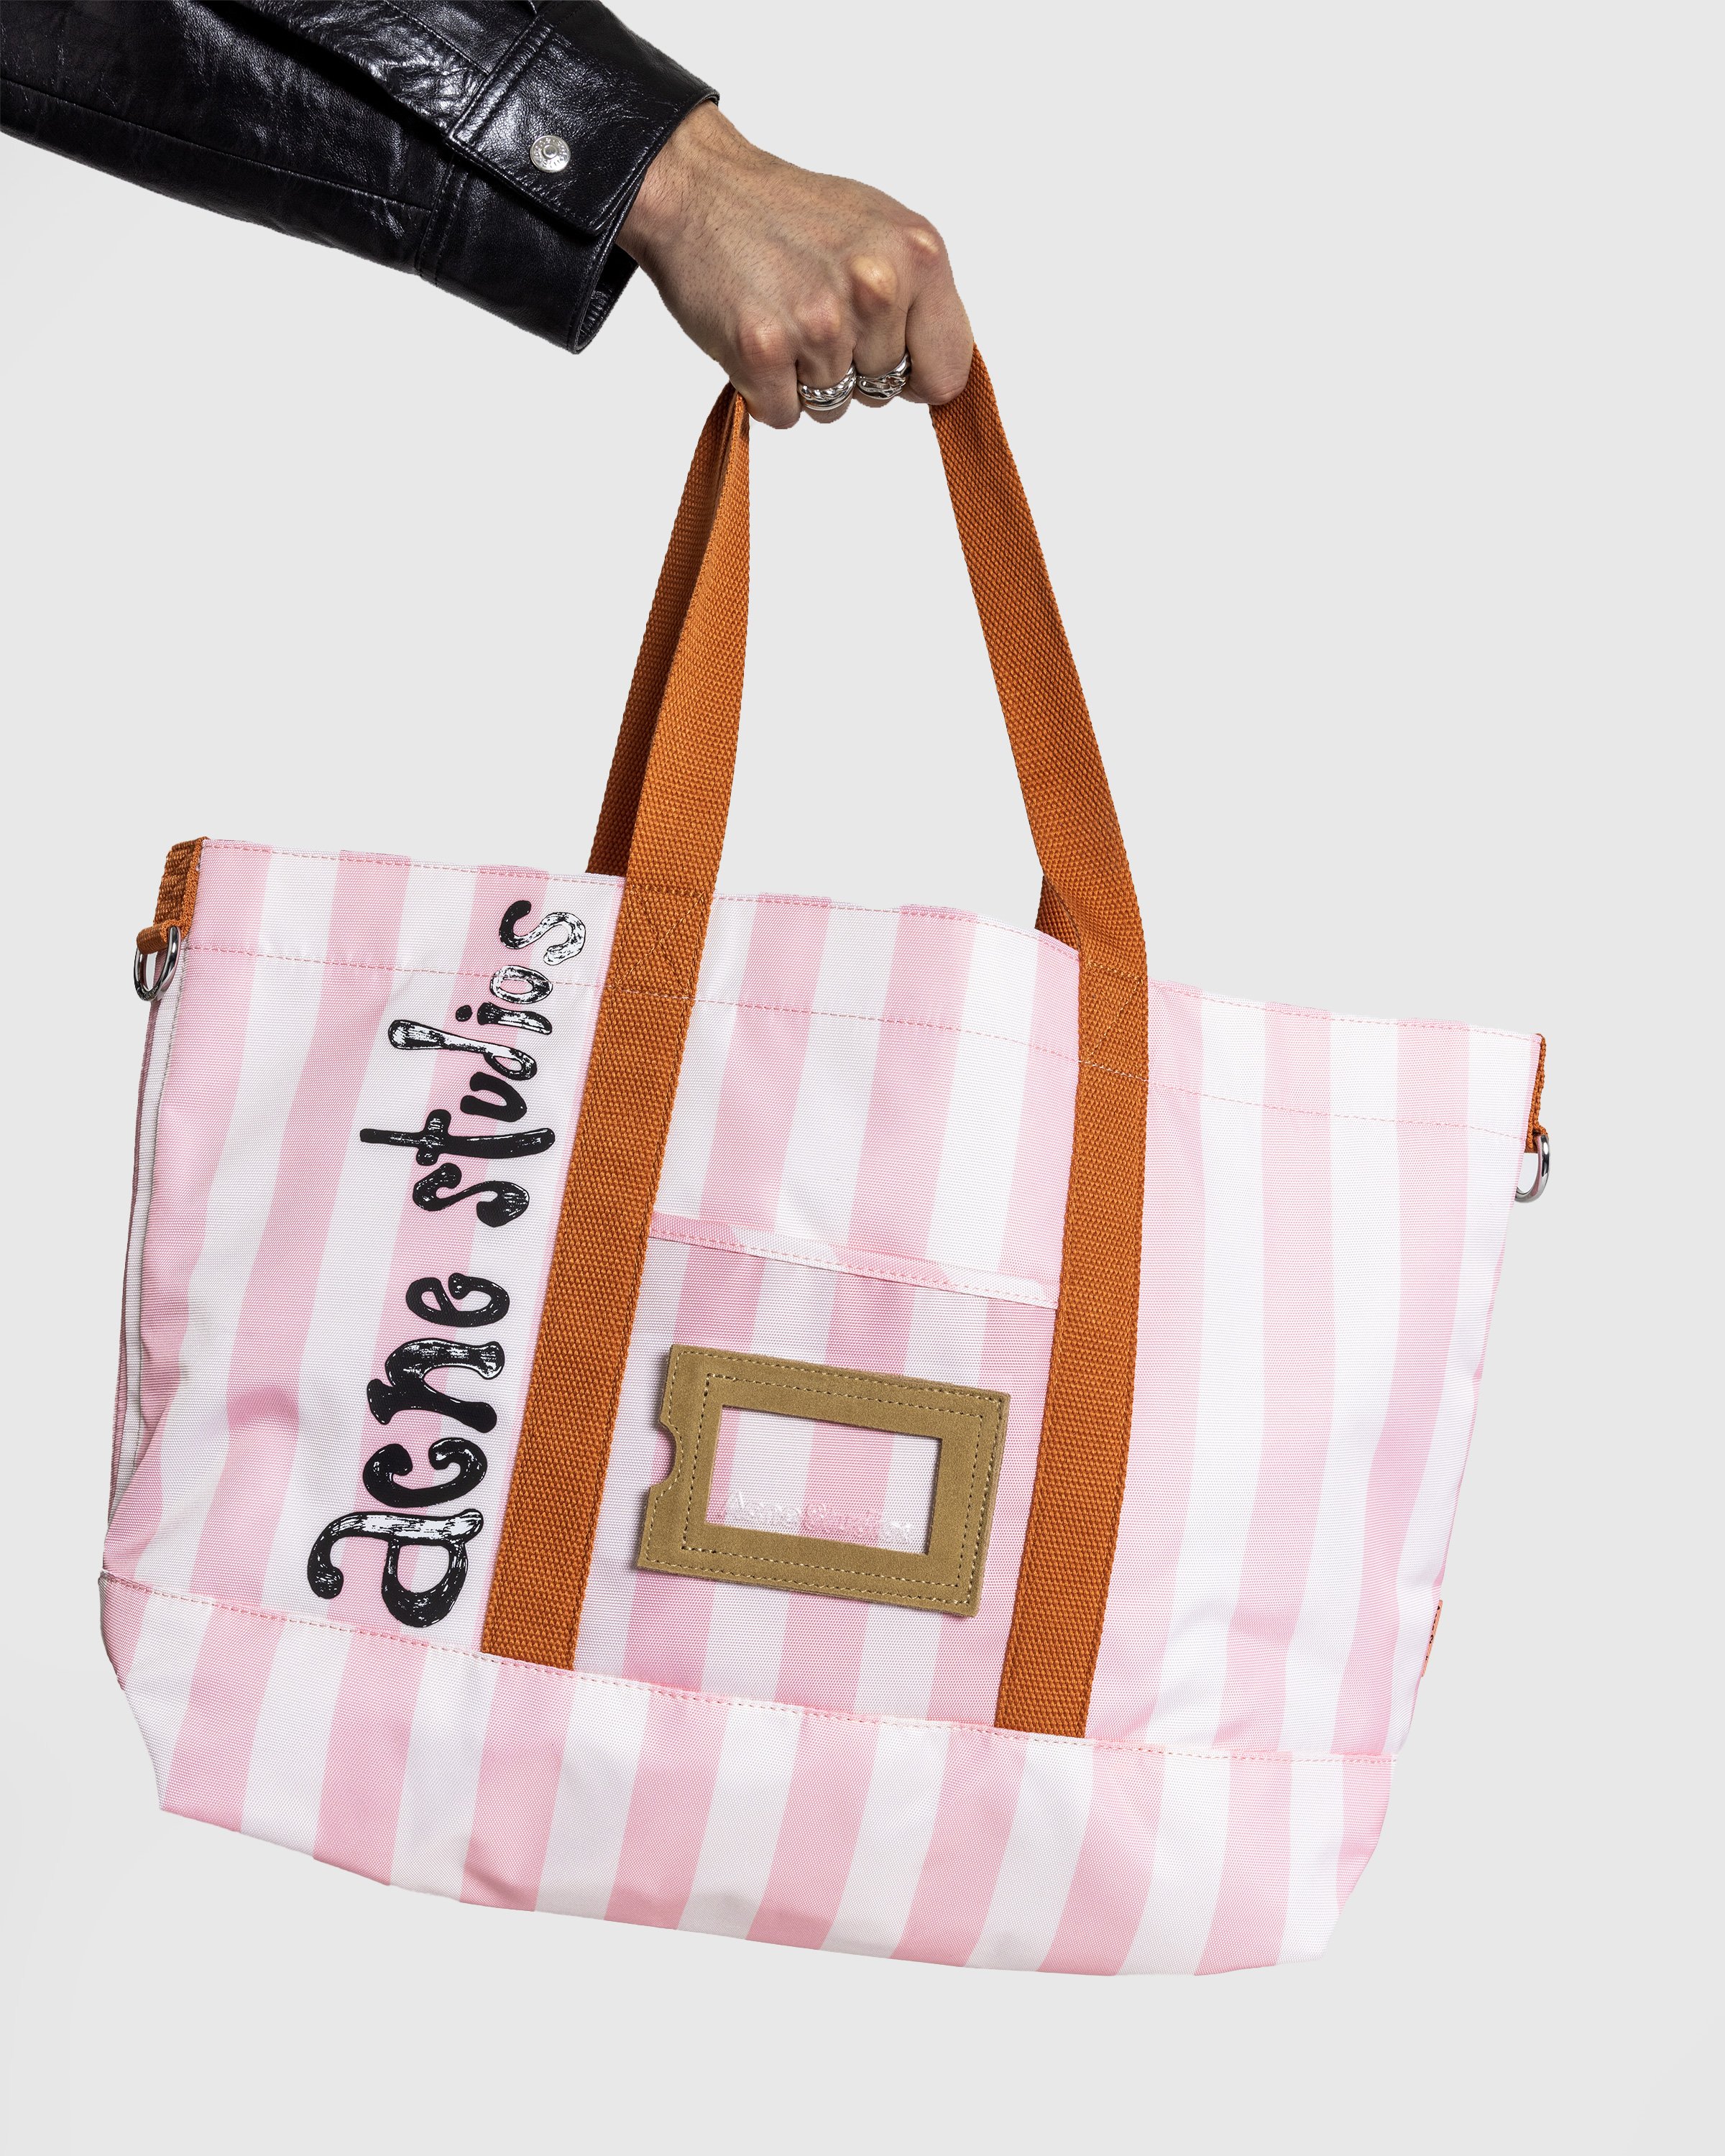 Acne Studios - FN-UX-BAGS000153 Light Pink/ Off White - Accessories - Pink - Image 6